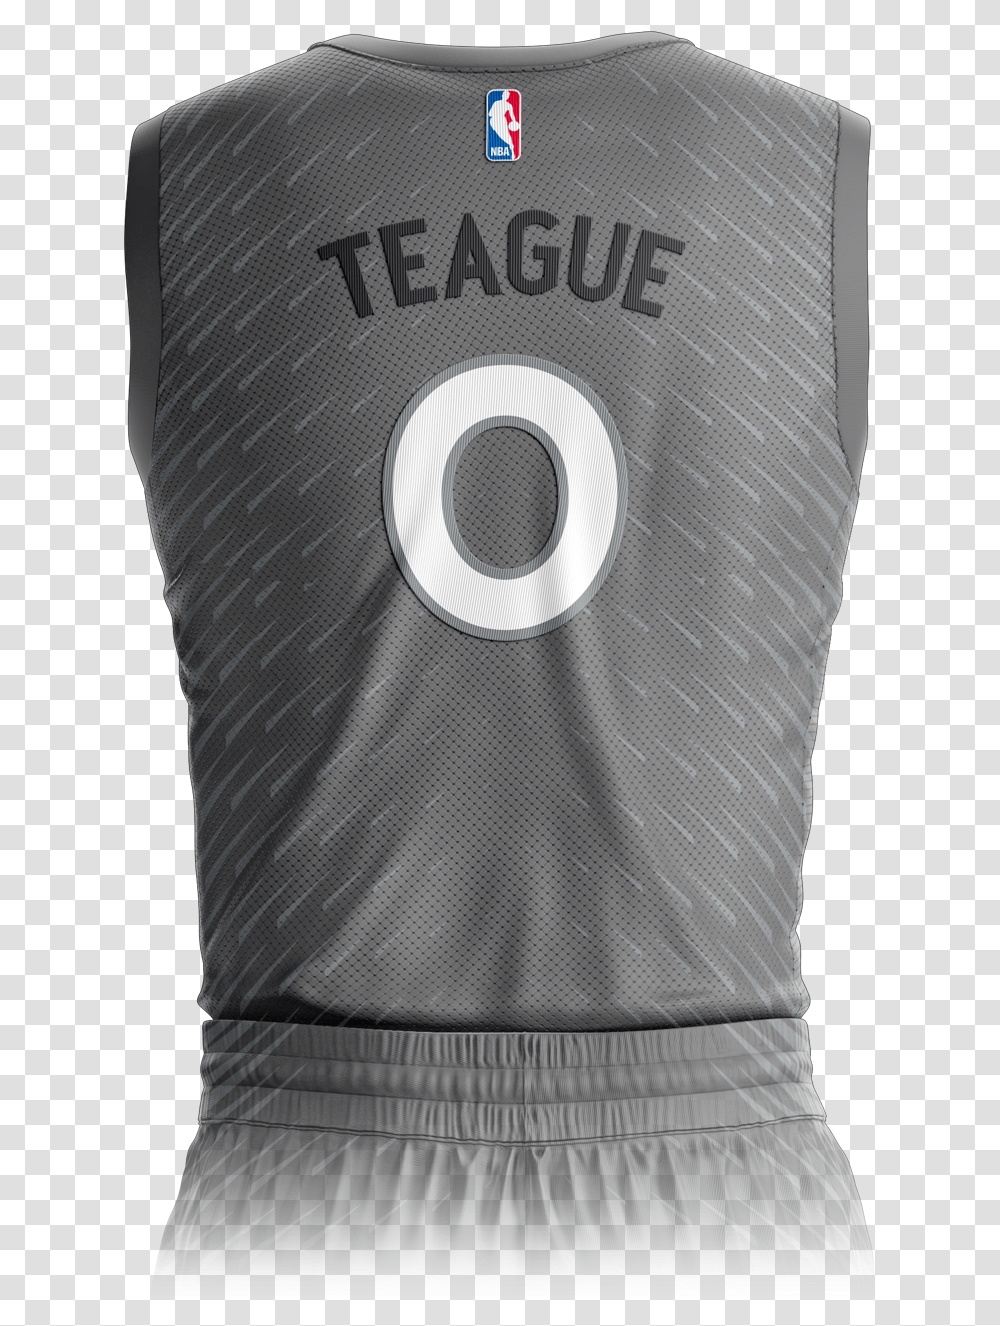 New Era Threads An In Depth Look At The New Wolves Minnesota Timberwolves Jersey Gray, Bib, Shirt, Clothing, Apparel Transparent Png